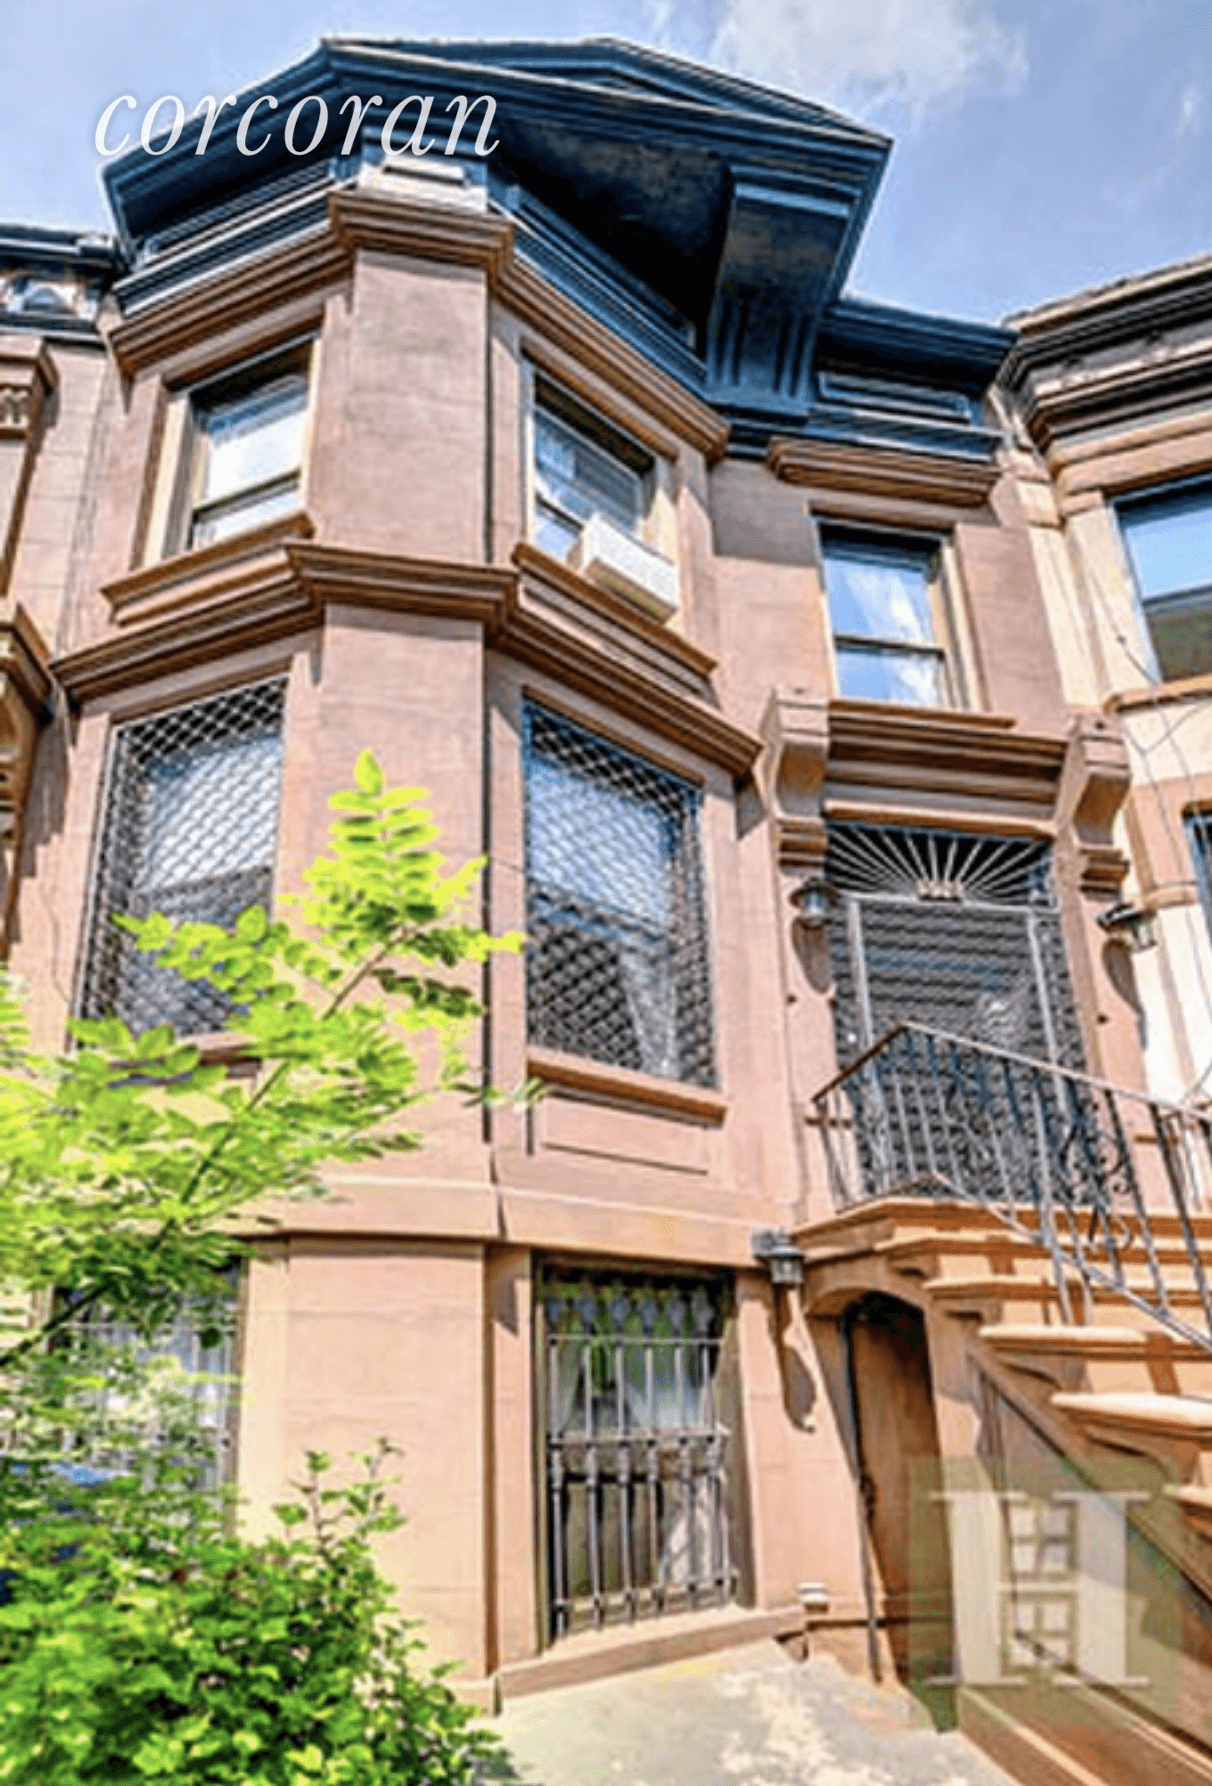 379 2ND STREET Prime Park Slope Fully renovated from top to bottom, enjoy this 3 4 bedroom full townhouse complete with finished basement rec room and large garden.